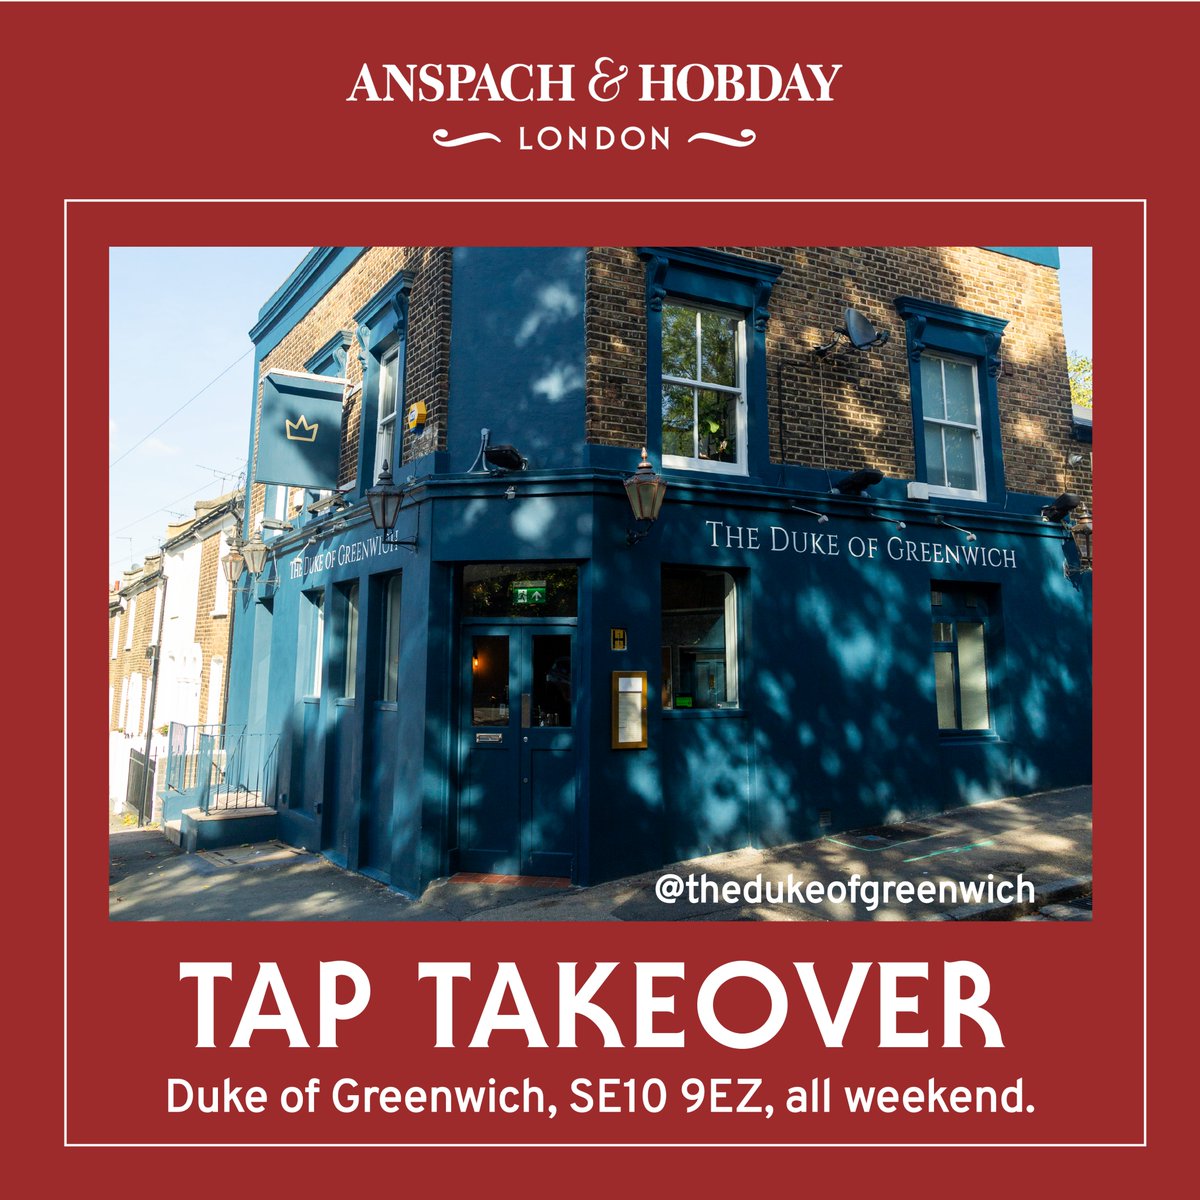 This weekend we're going to the best beer garden in Greenwich! All weekend tap takeover, with a sweet inside/outside bar set up and all our greatest brews. See you at the Duke of Greenwich, SE10 9EZ.